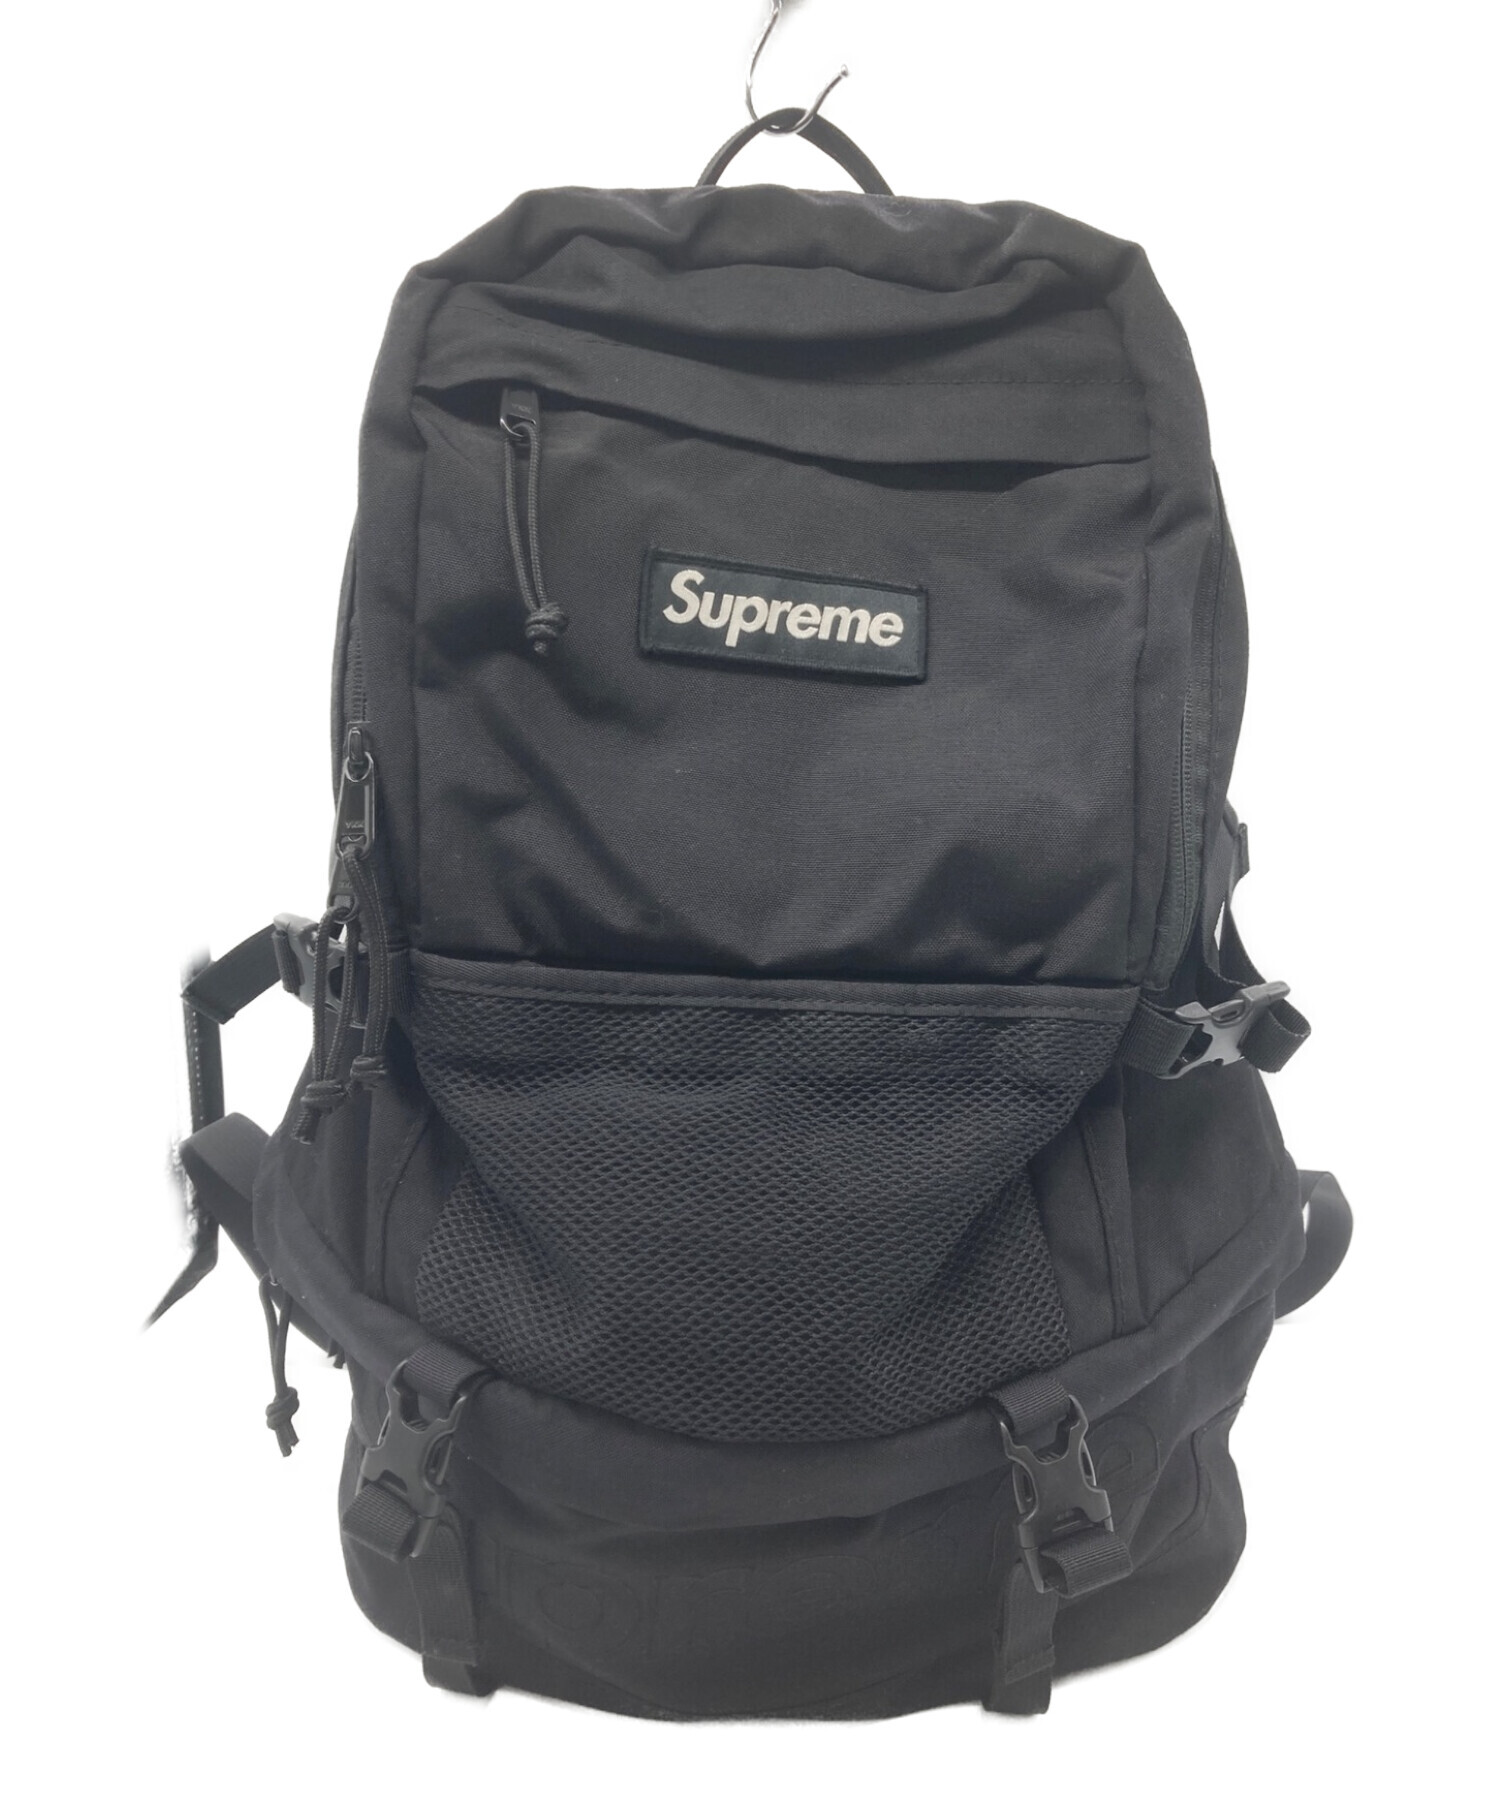 AprilroofsSupreme Contour Backpack 15fw 新品未使用2